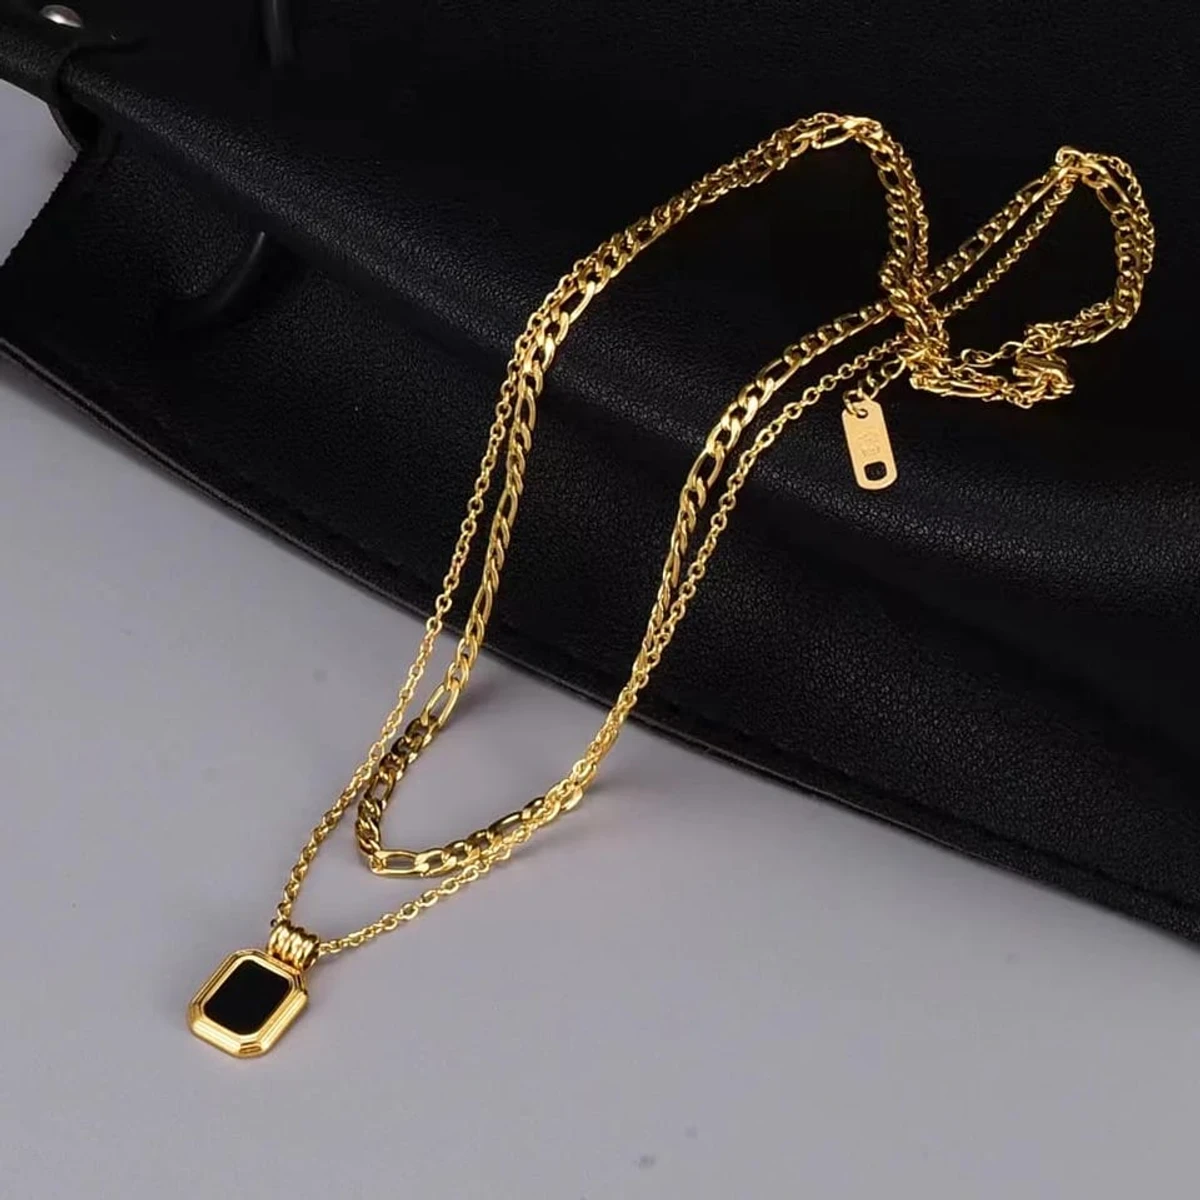 Fashion Black Square Pendant Necklace Gold Plating Double Layer Square Pendant Necklace Chains Stainless Steel Necklace For Women Girls Jewelry